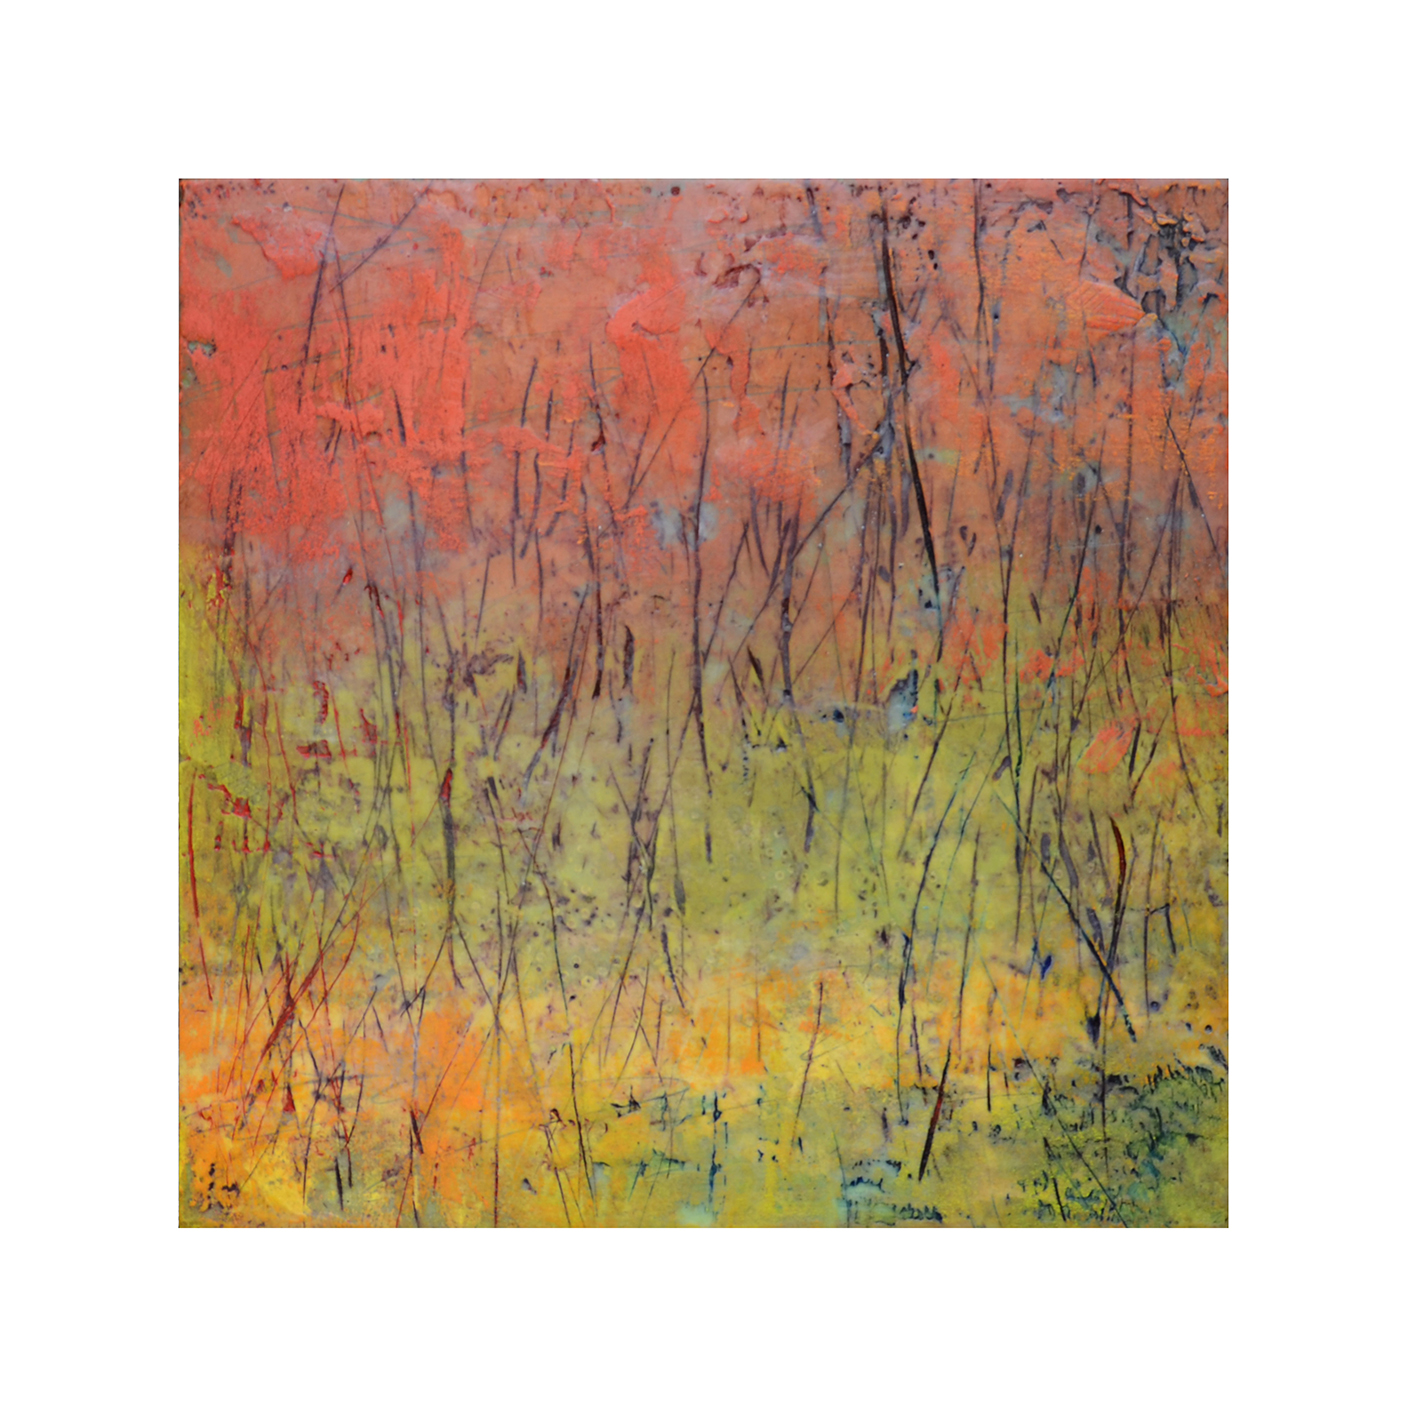   Thicket 1   12 x 12  Encaustic on Panel  $300 